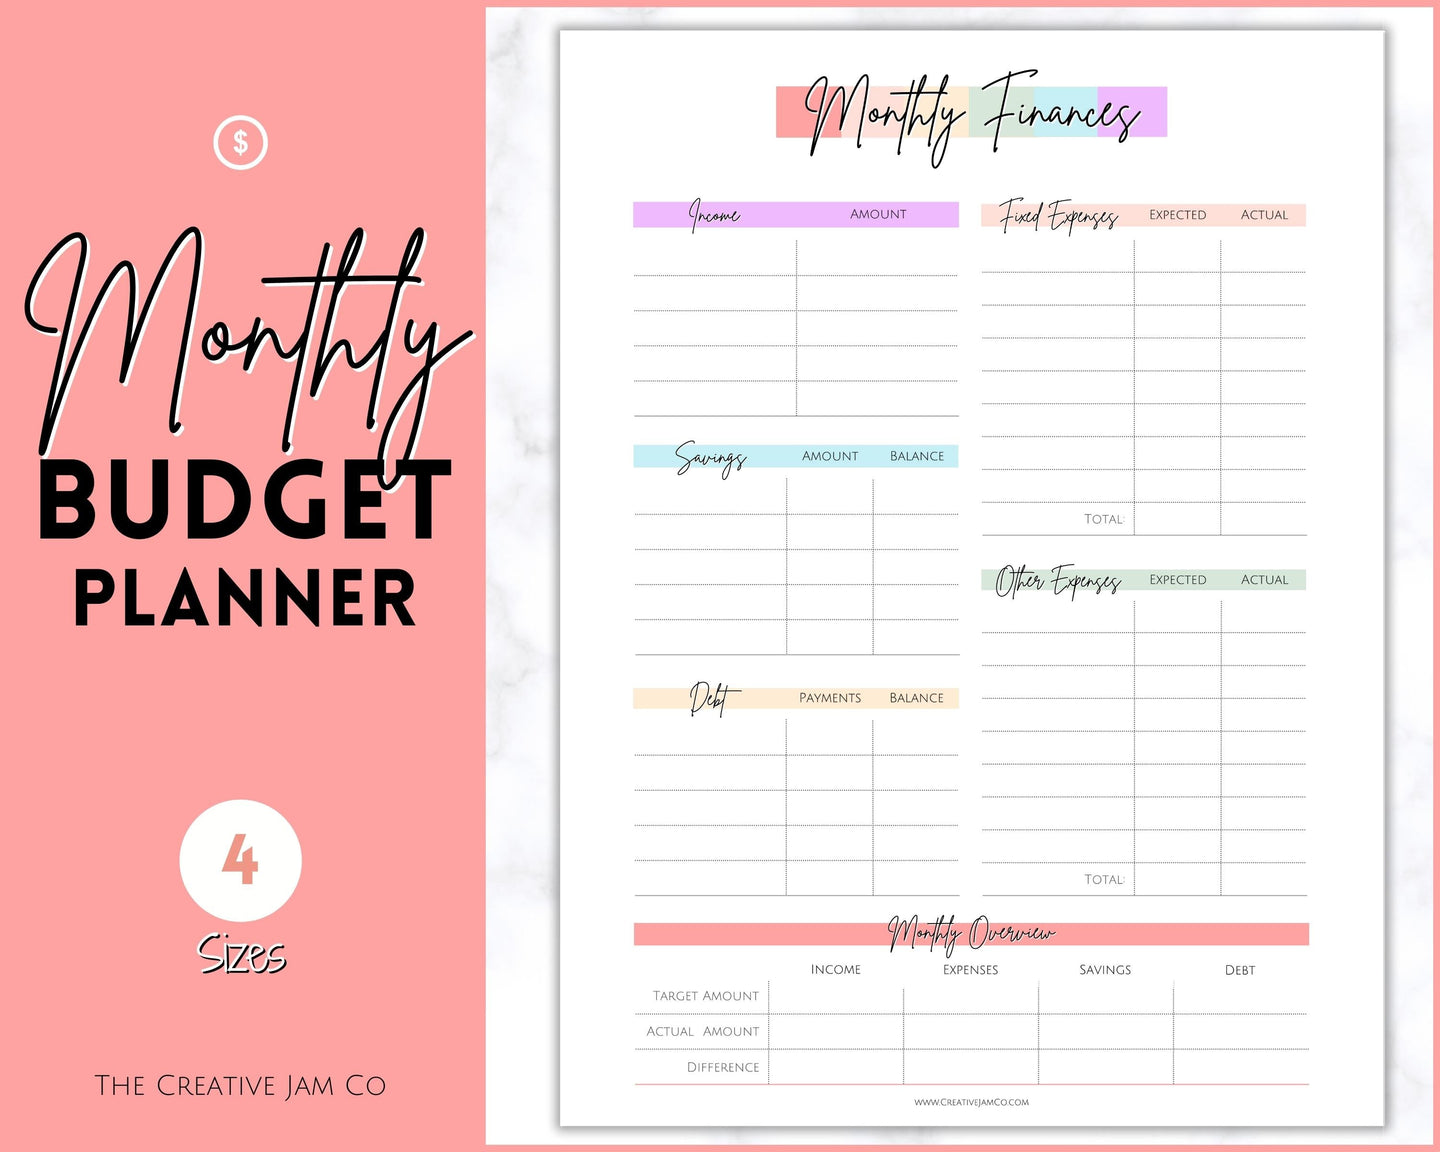 Paycheck Budget Planner Printable, Monthly Financial Tracker Template, Savings Tracker, Binder, Debt, Bill, Spending, Expenses Income Money | Pastel Rainbow